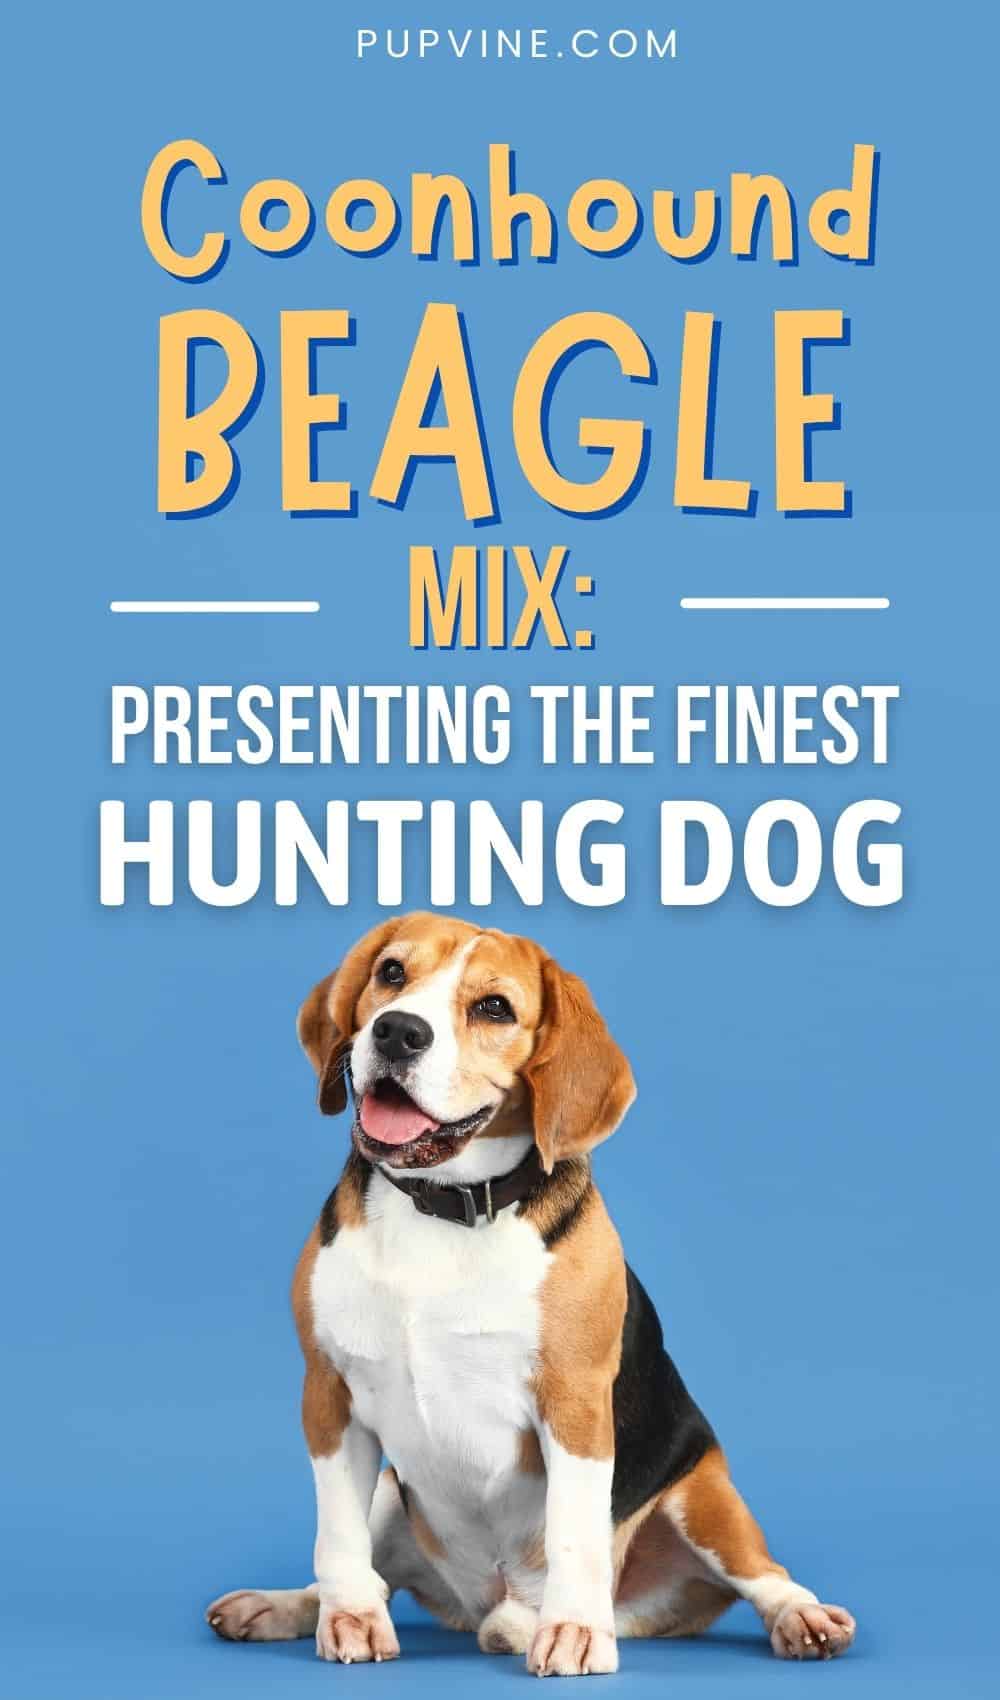 Coonhound Beagle Mix – Is This The Best Beagle Mix?